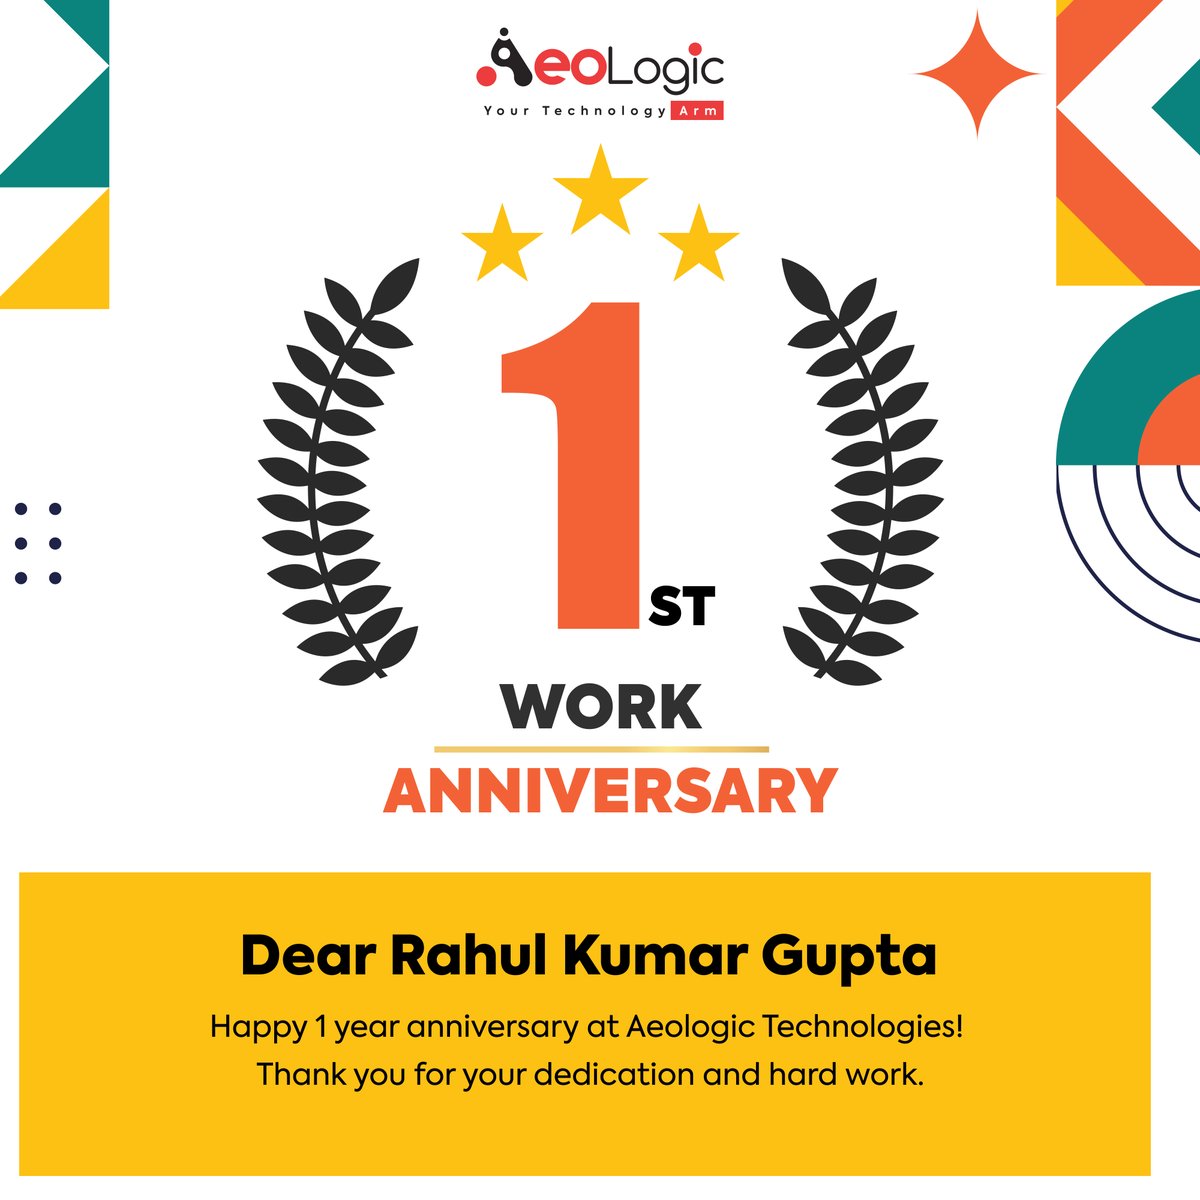 Happy 1st Work Anniversary, Rahul Kumar Gupta! 🎉

Today marks one year since you joined the Aeologic Technologies family, and what an incredible journey it's been! Your dedication and hard work have truly made a difference.

#AeologicTechnologies #WorkAnniversary #Team